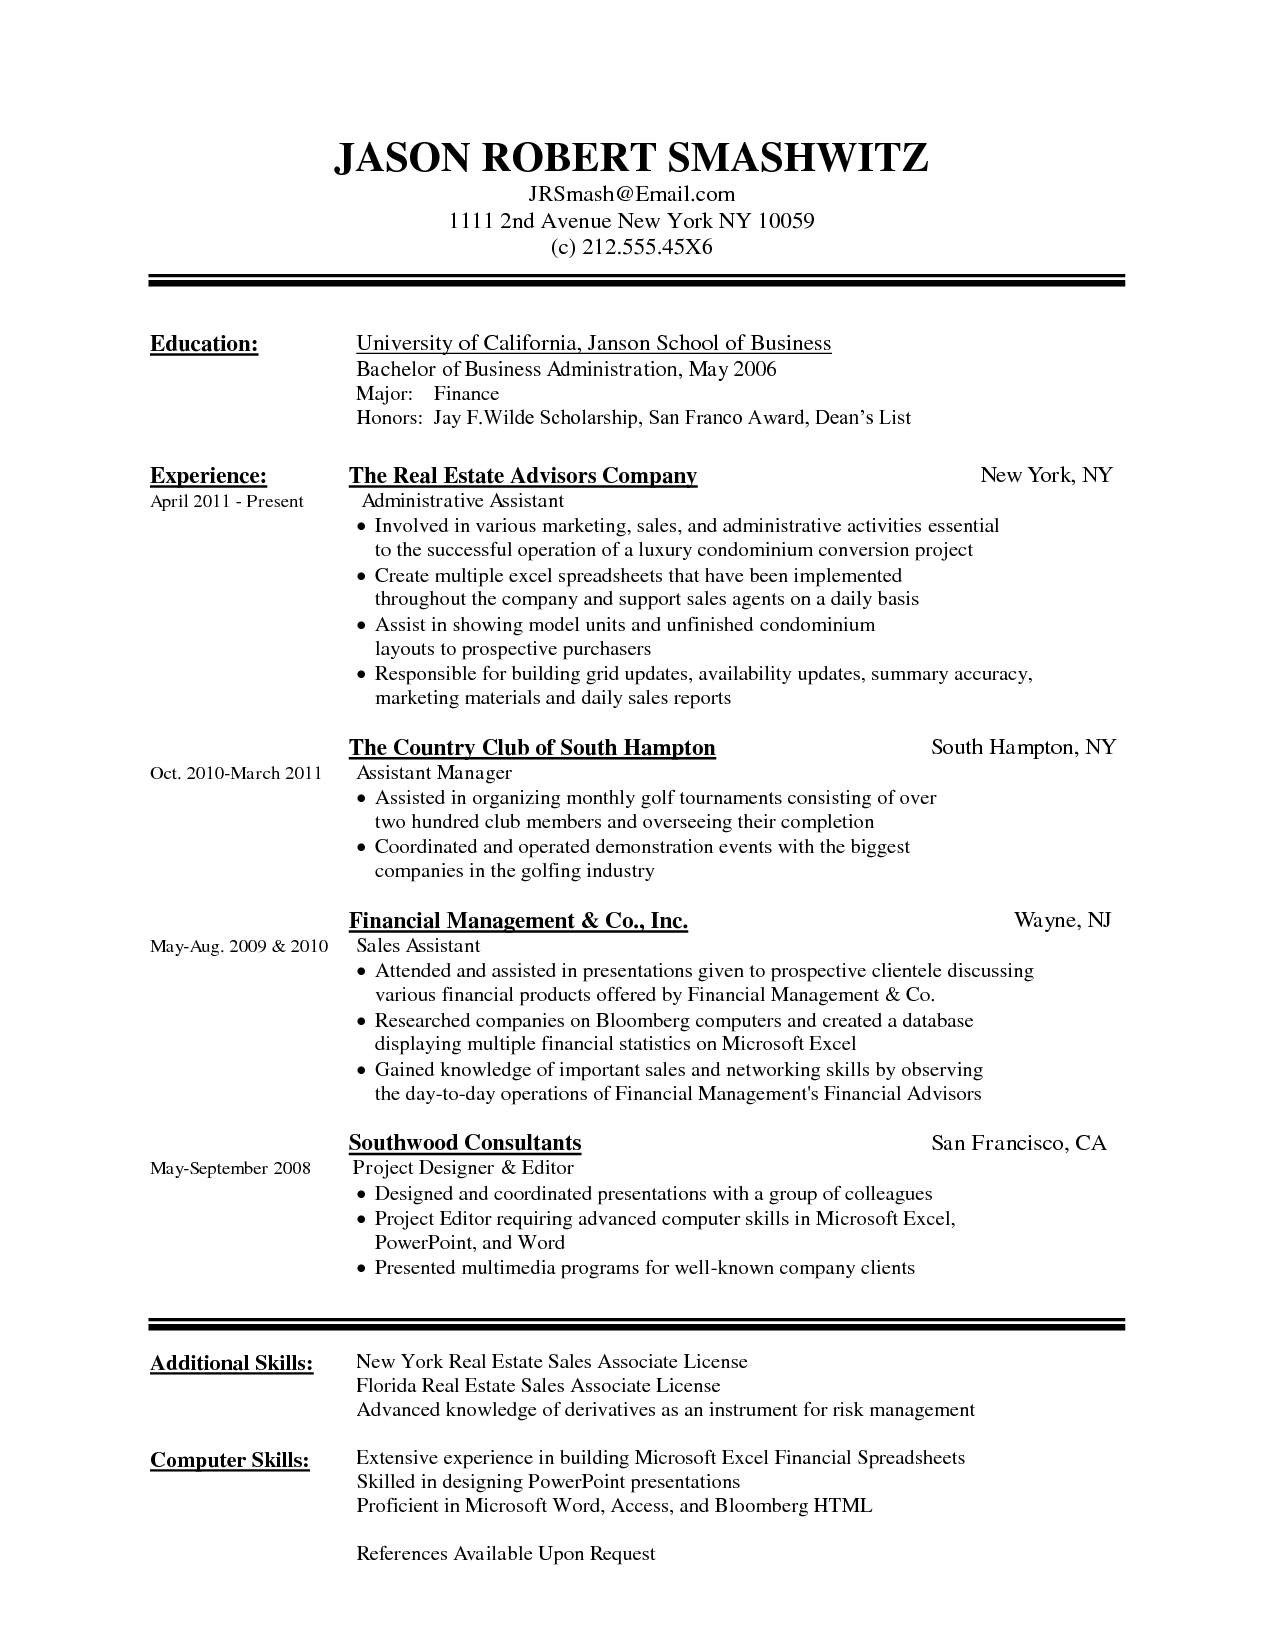 Canadian Resume Format Doc planner template free